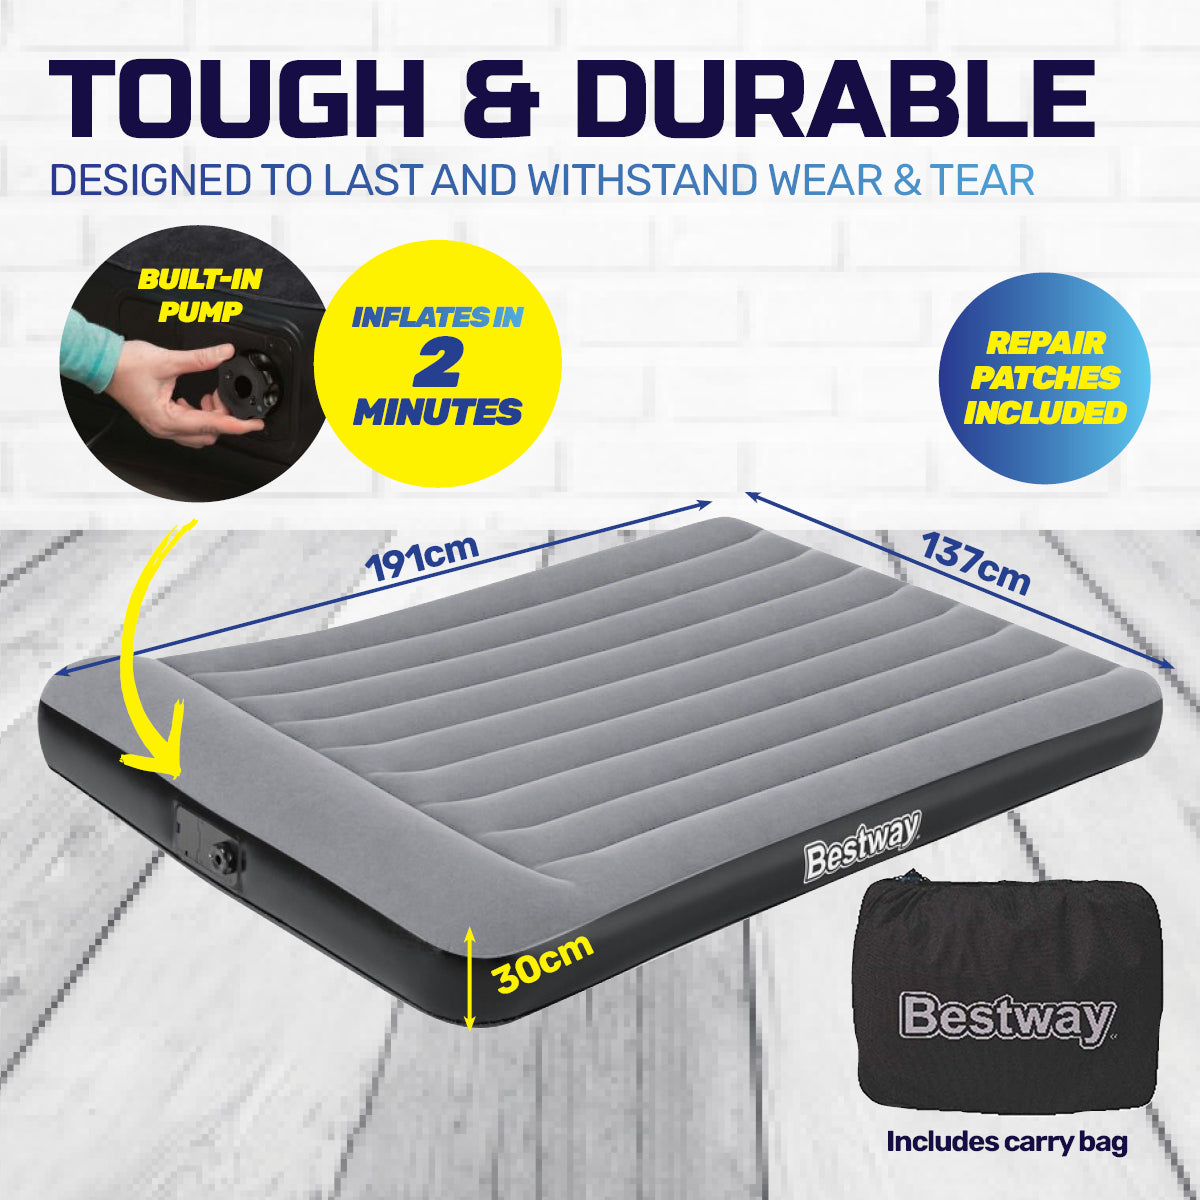 Bestway Double Inflatable Air Bed Tritech Built-In Pump Heavy Duty - SILBERSHELL